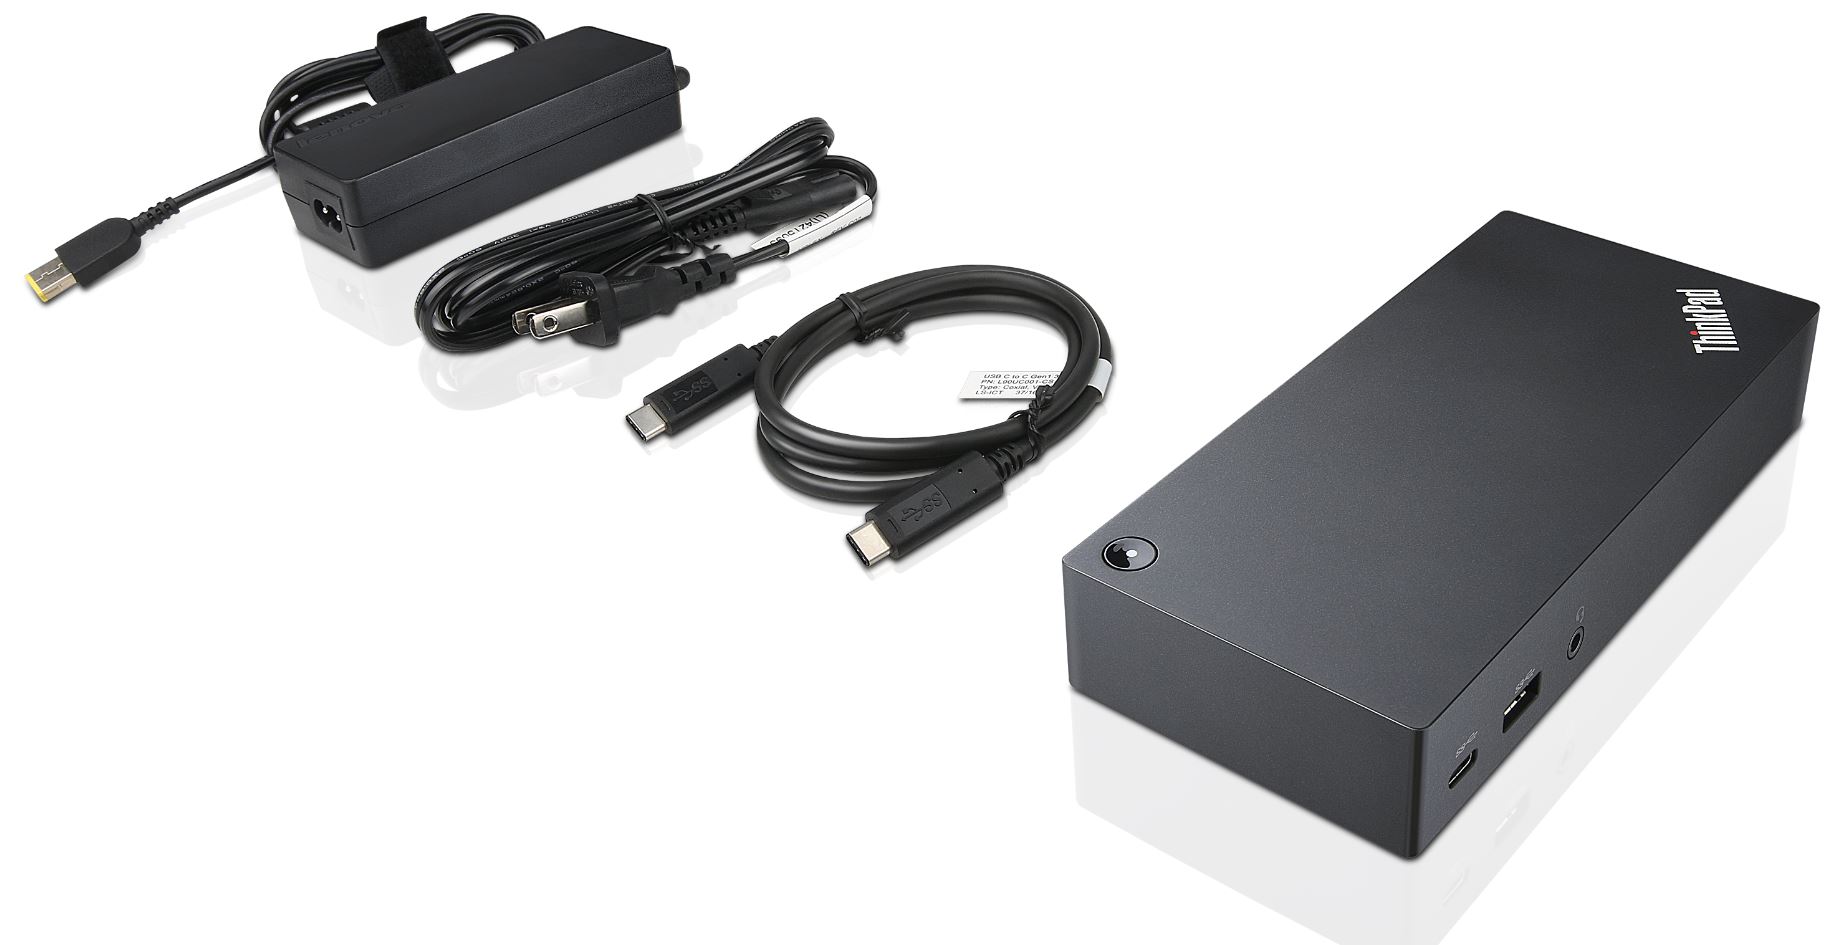 ThinkPad USB-C Dock - Overview and Service Parts - Lenovo Support